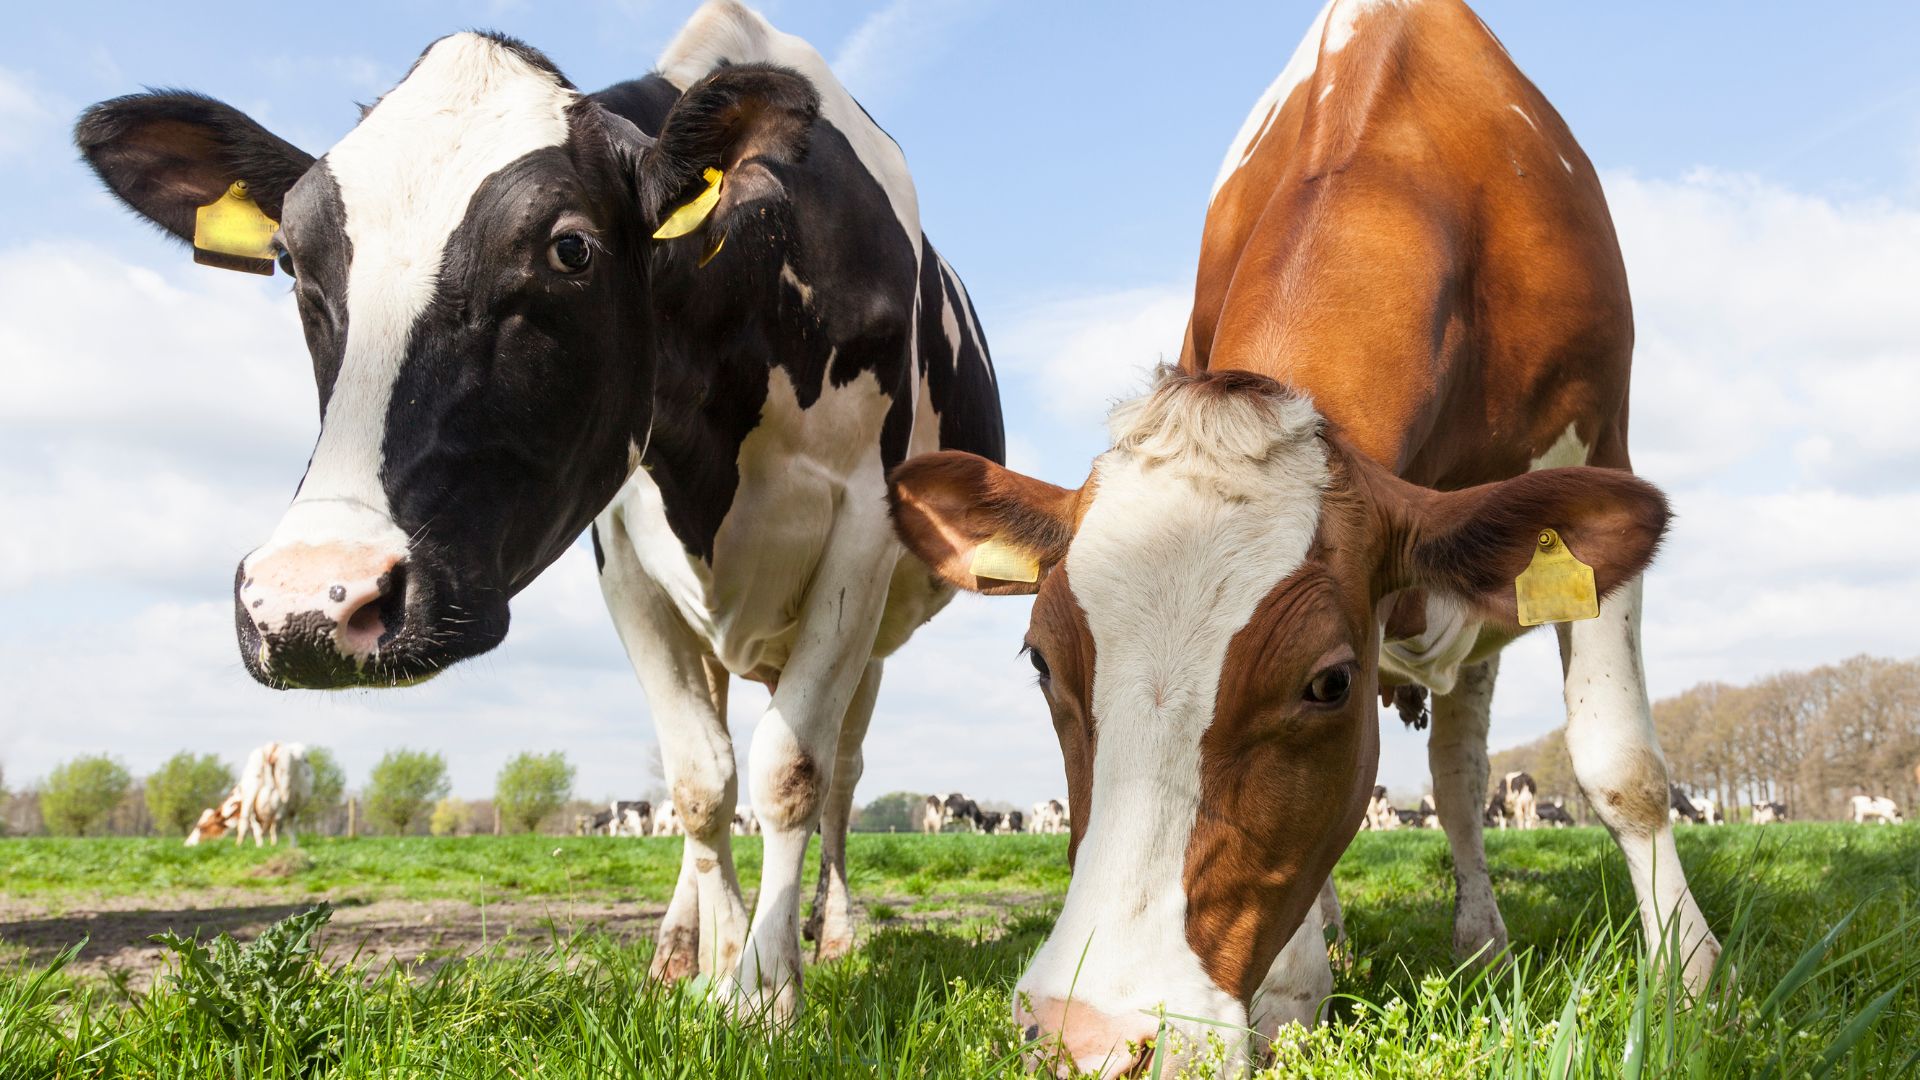 We are partnering with Agrotech to breed the highest quality dairy cows